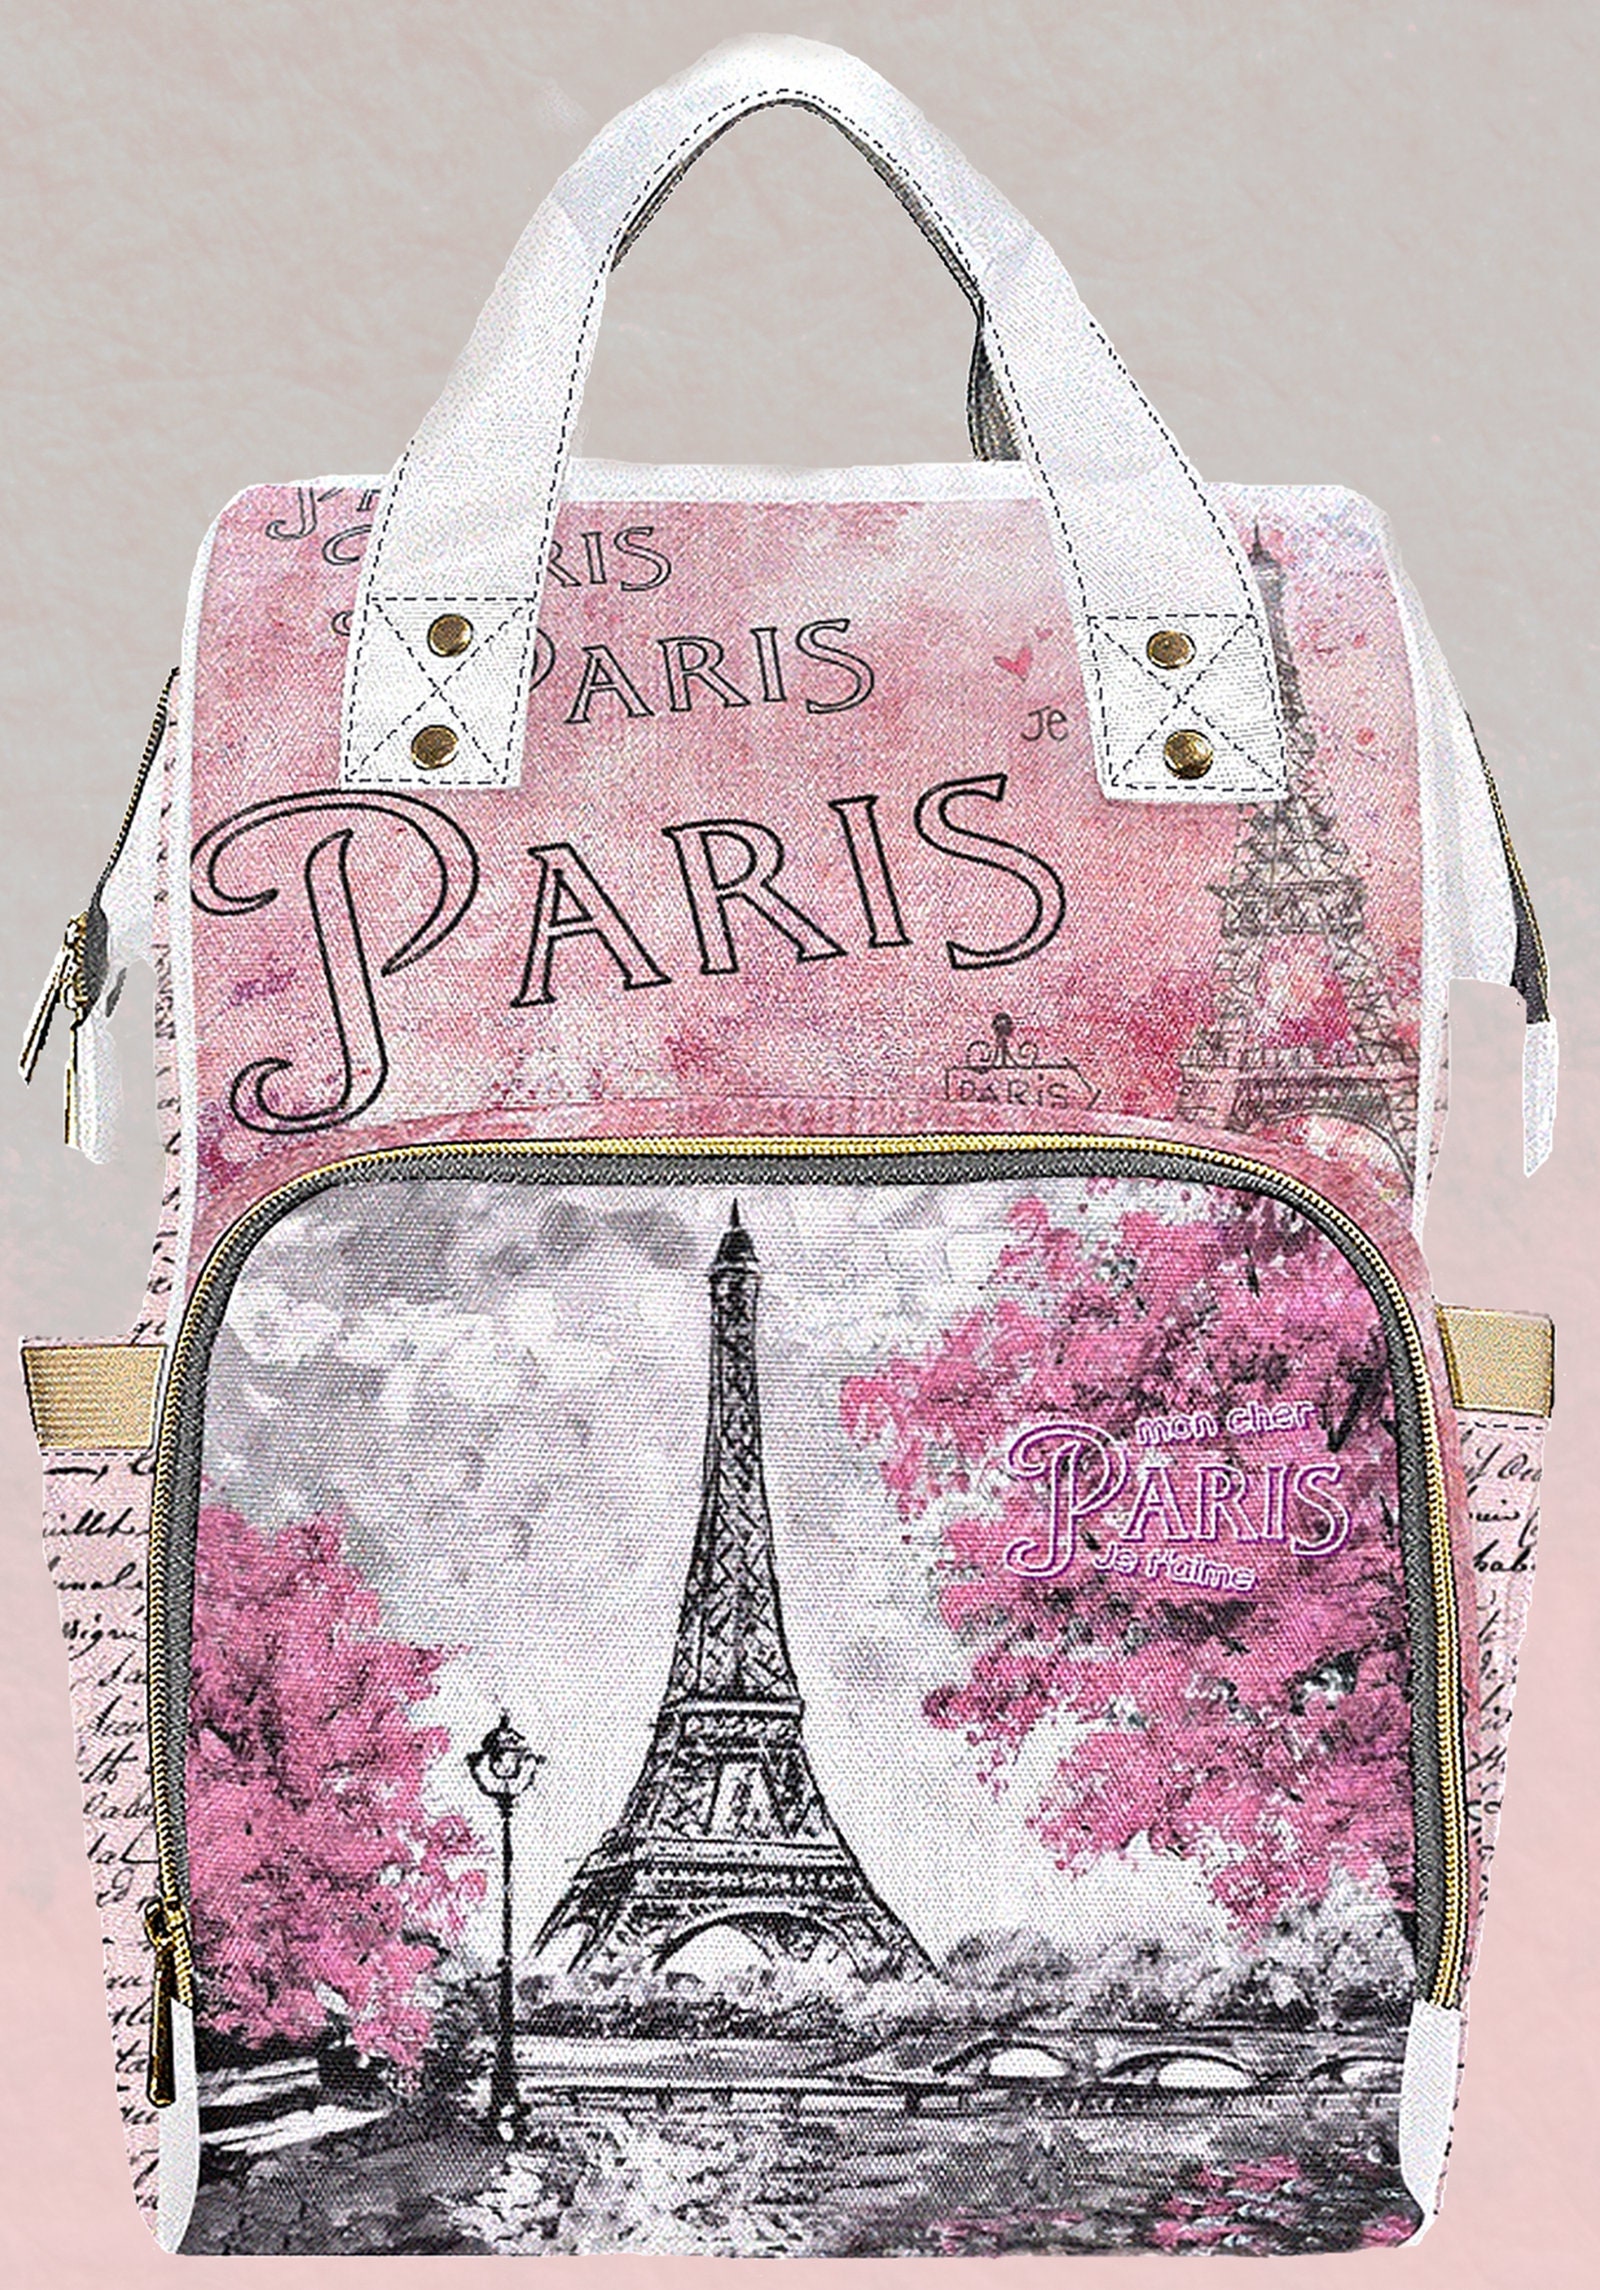 Women's Backpack Purse Paris Eiffel Tower Art Painting Women's Waterproof  Travel Backpack School Bag Small PU Leather, Multi-Colour, multicoloured :  : Fashion